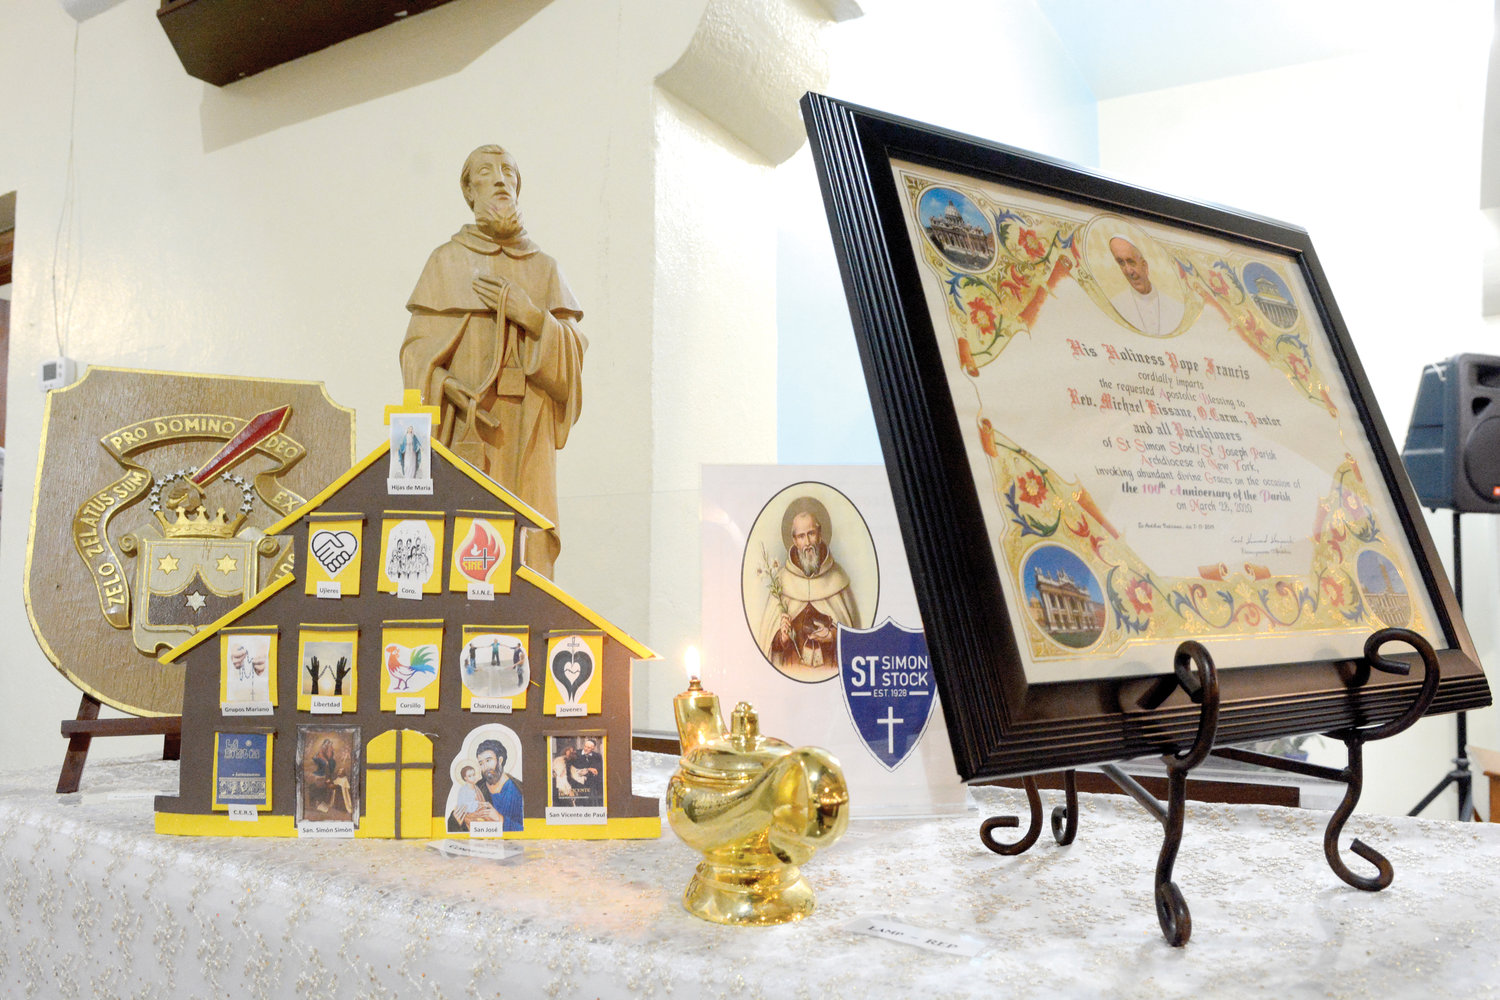 A 100th anniversary display at the parish. The opening Mass last year was canceled because of the pandemic.